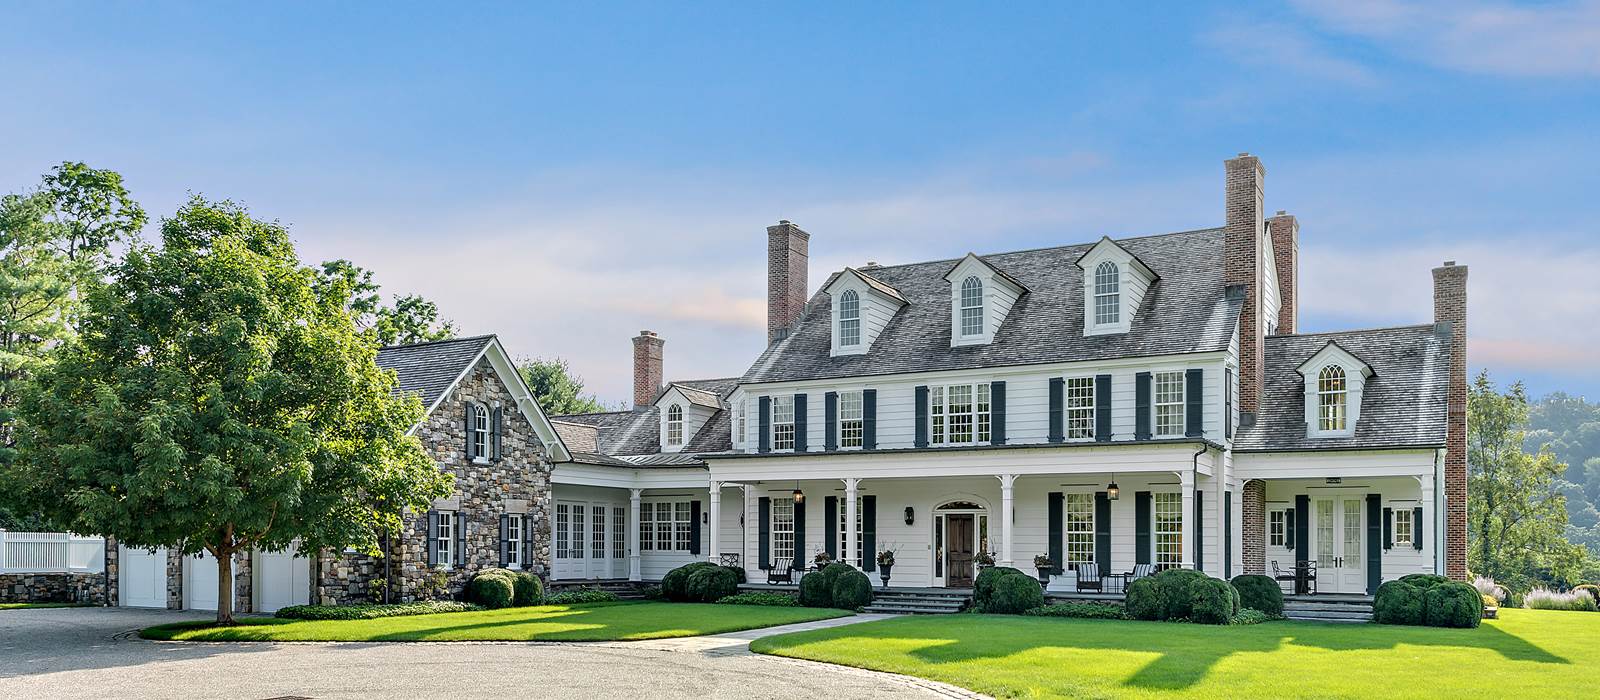 Grand Colonial Revival - Exterior Revisited